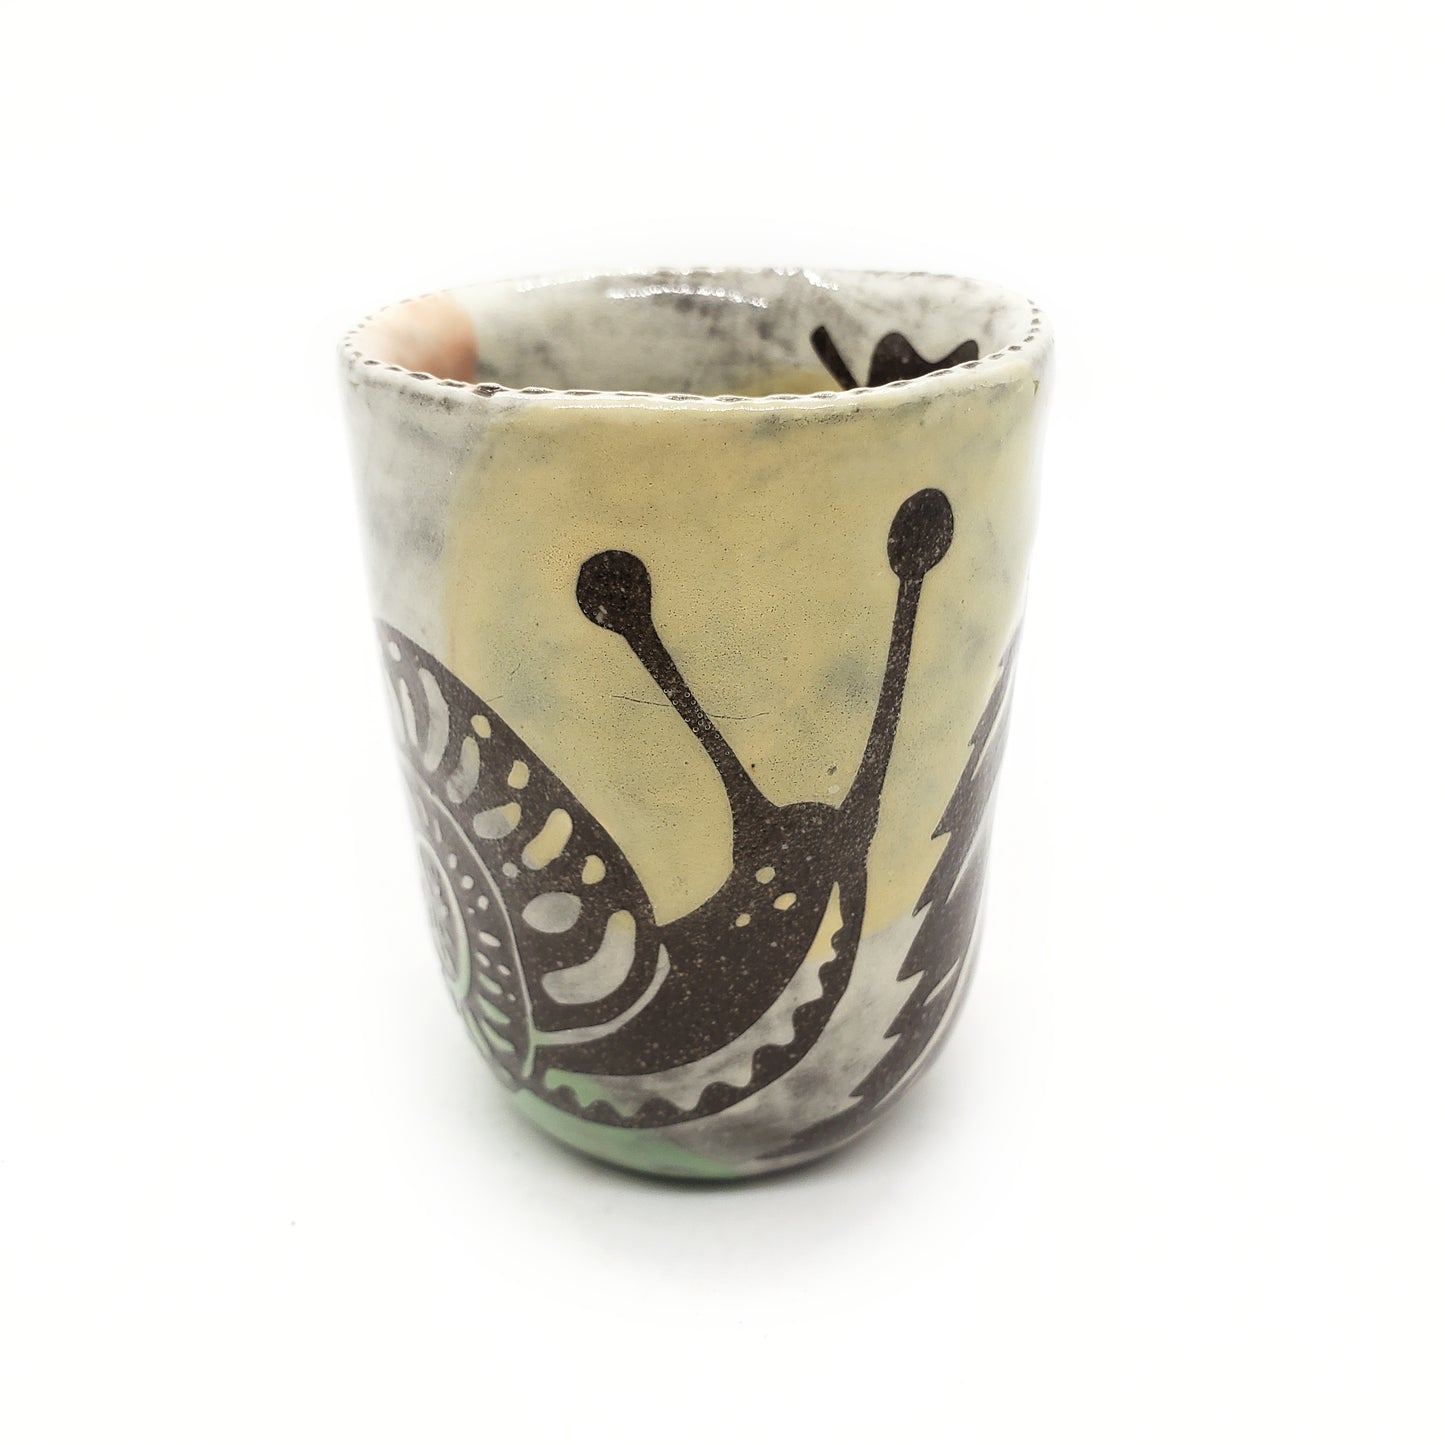 Mini cup - snail and leaves 2 (2 oz)